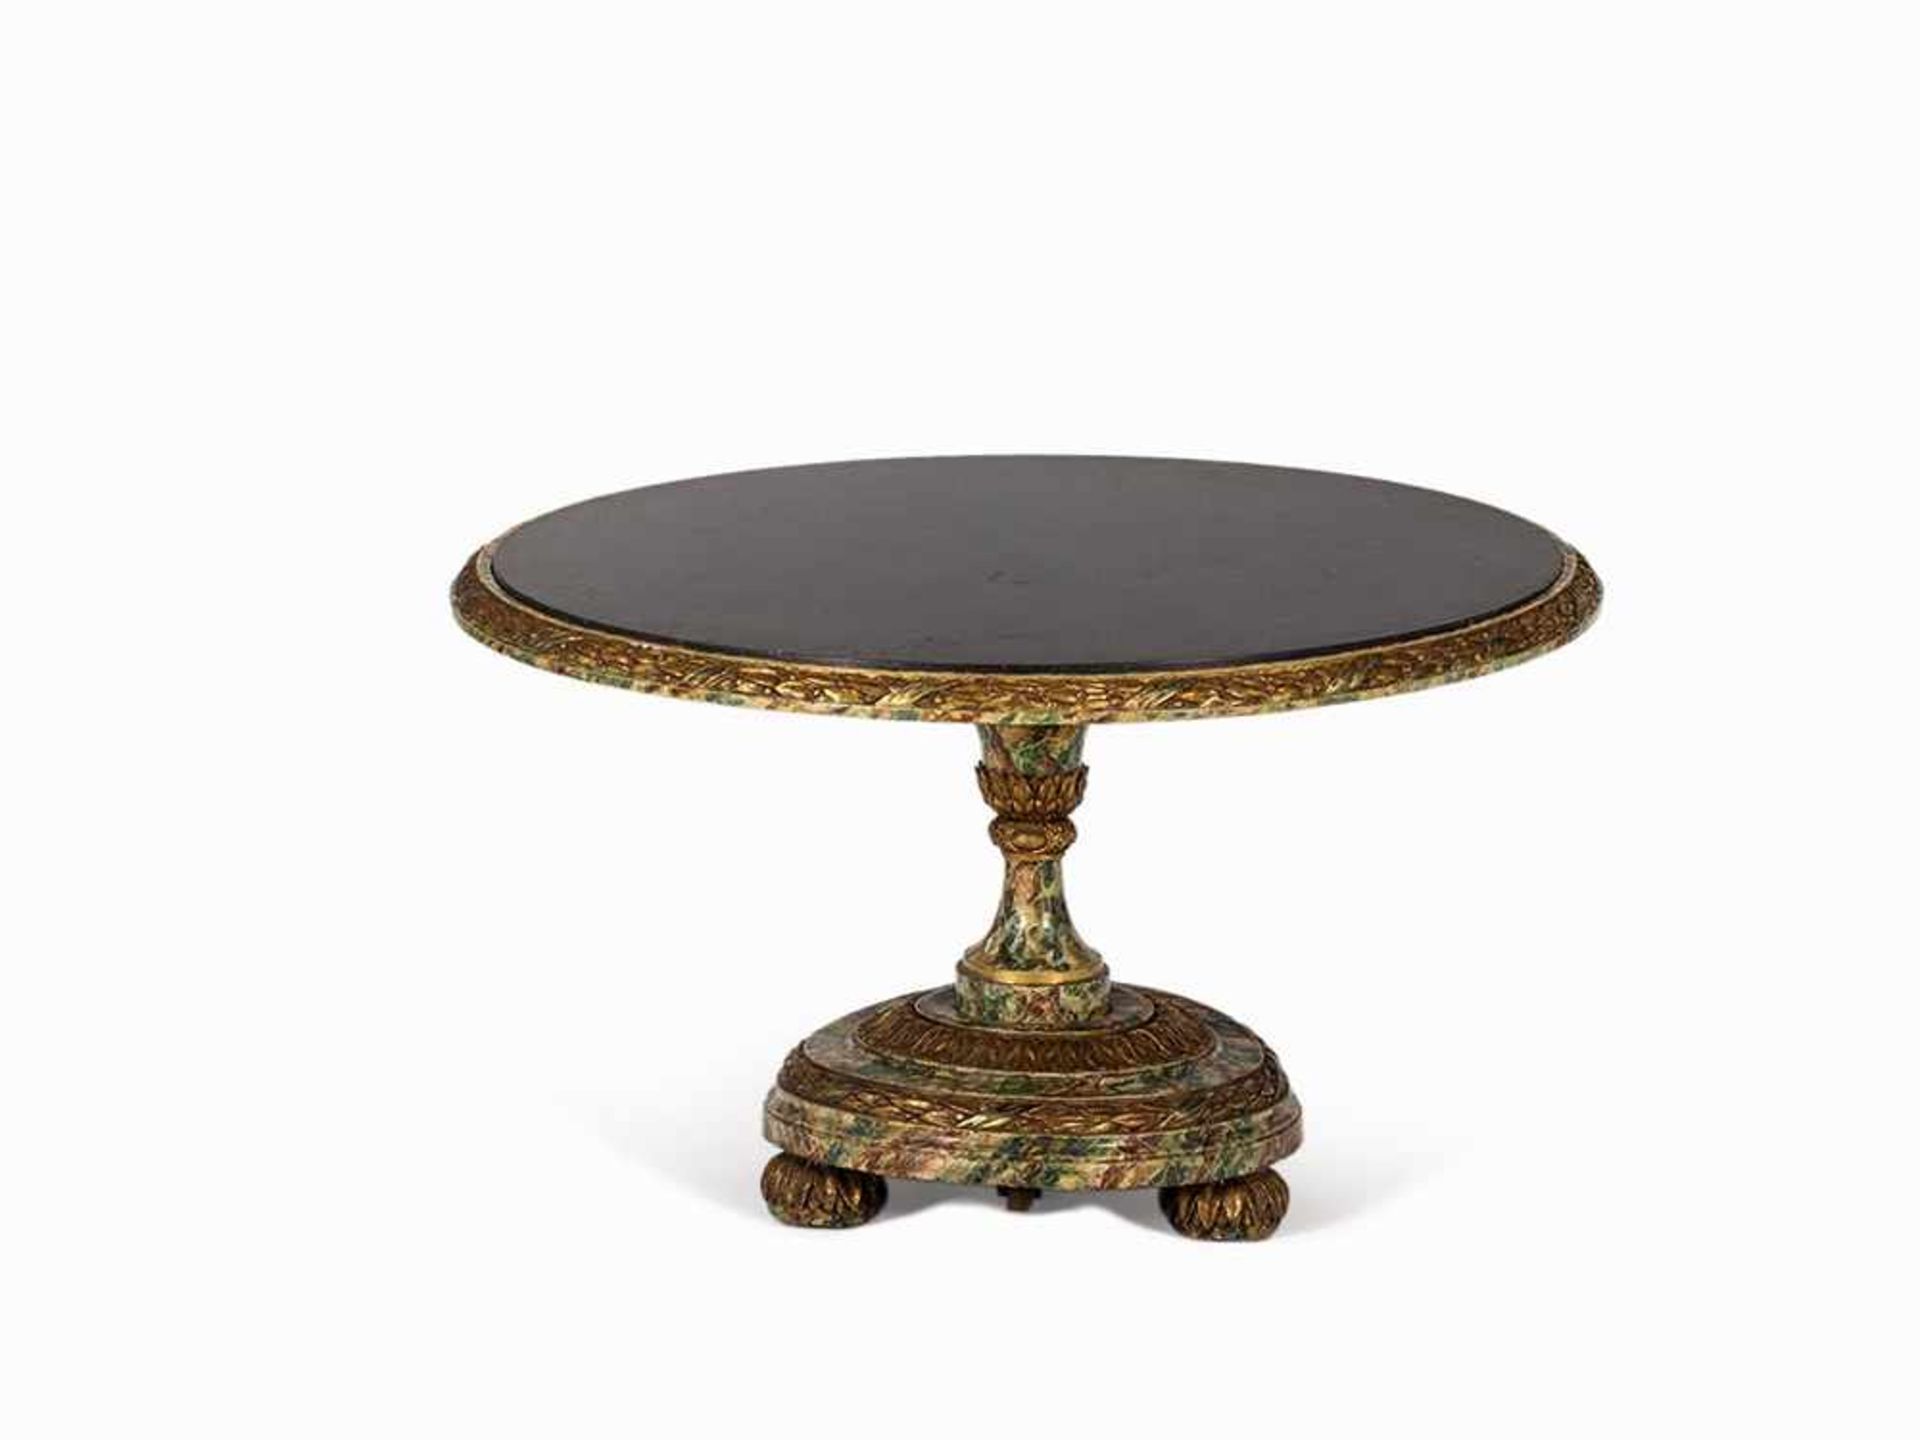 Circular Table, With Marble Finishing, Late 18th C. Softwood, polychrome painted and partly